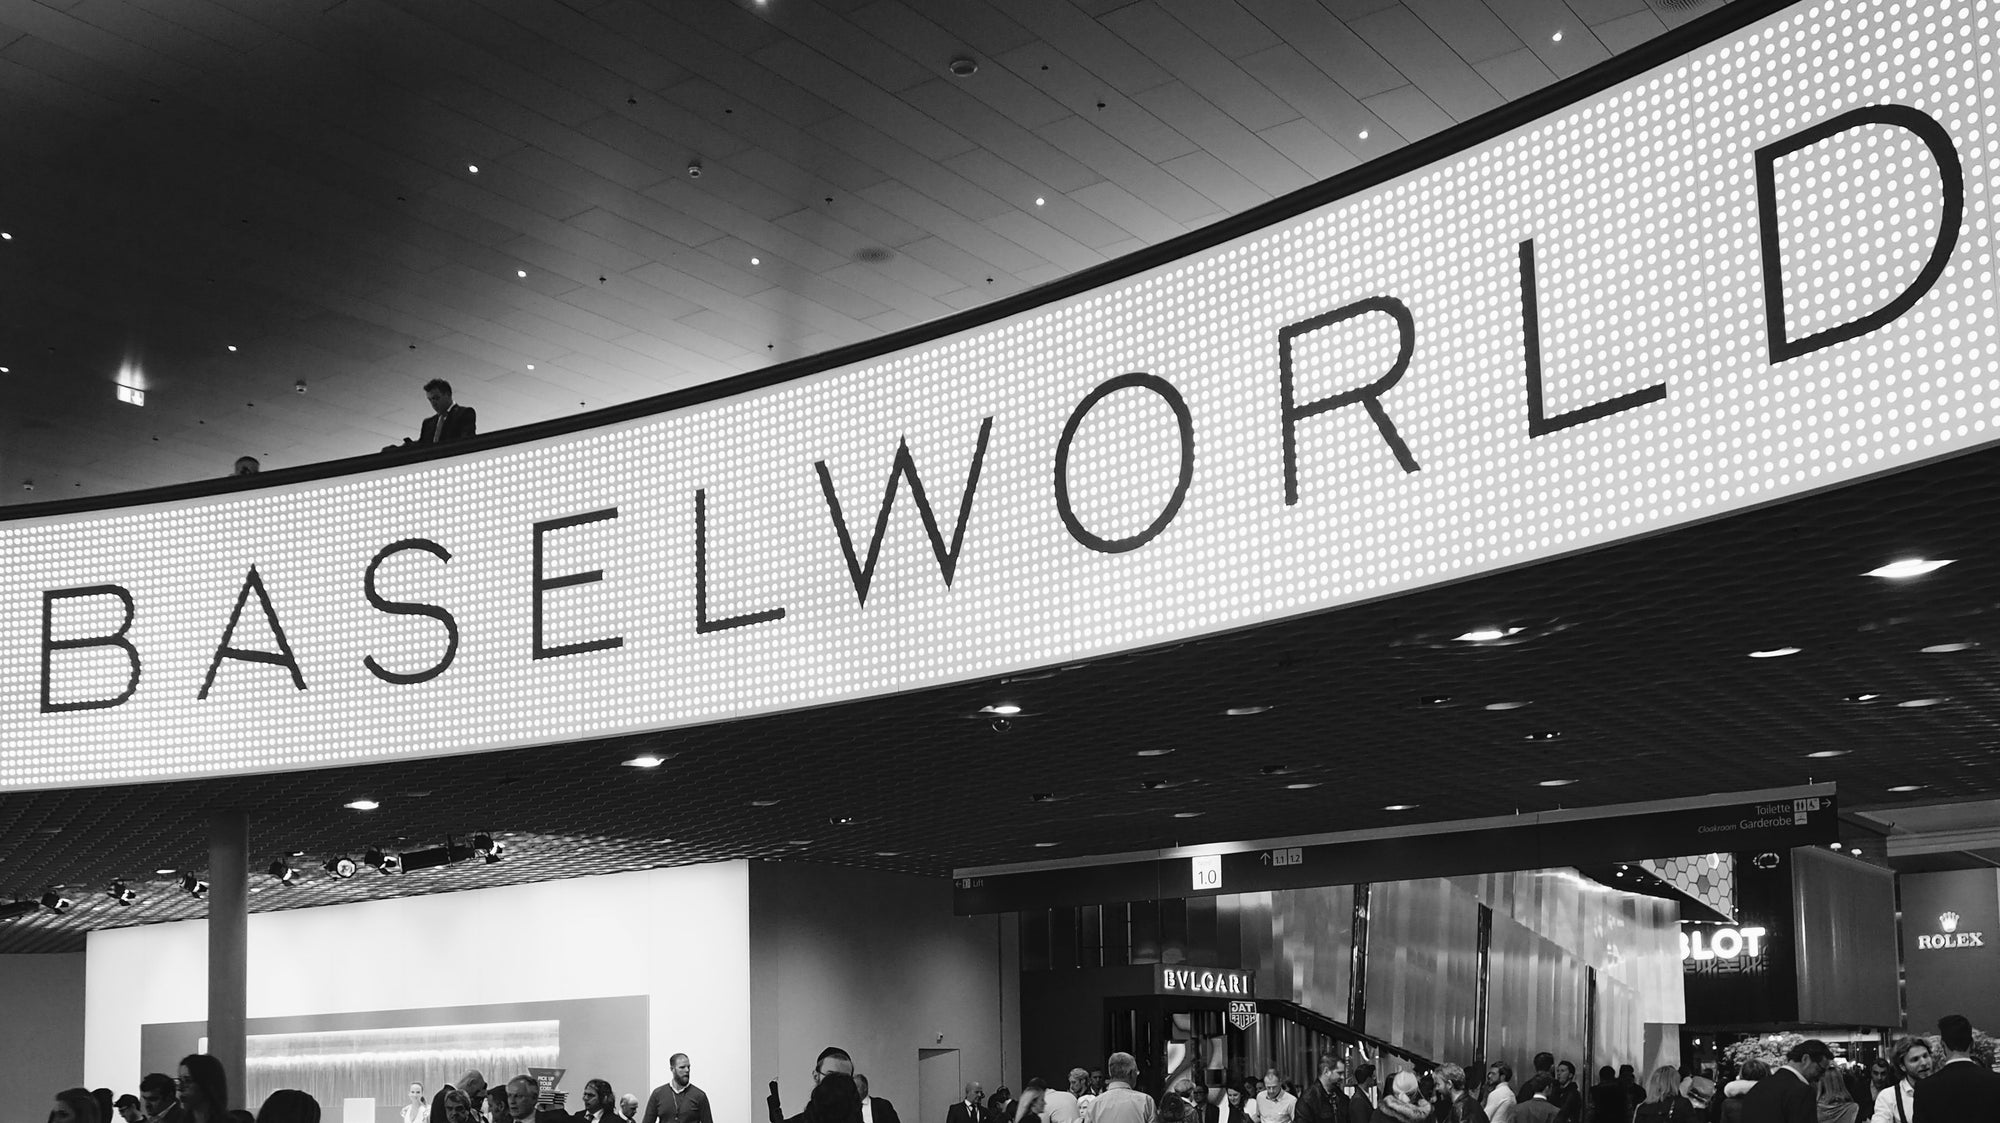 The B side of BaselWorld